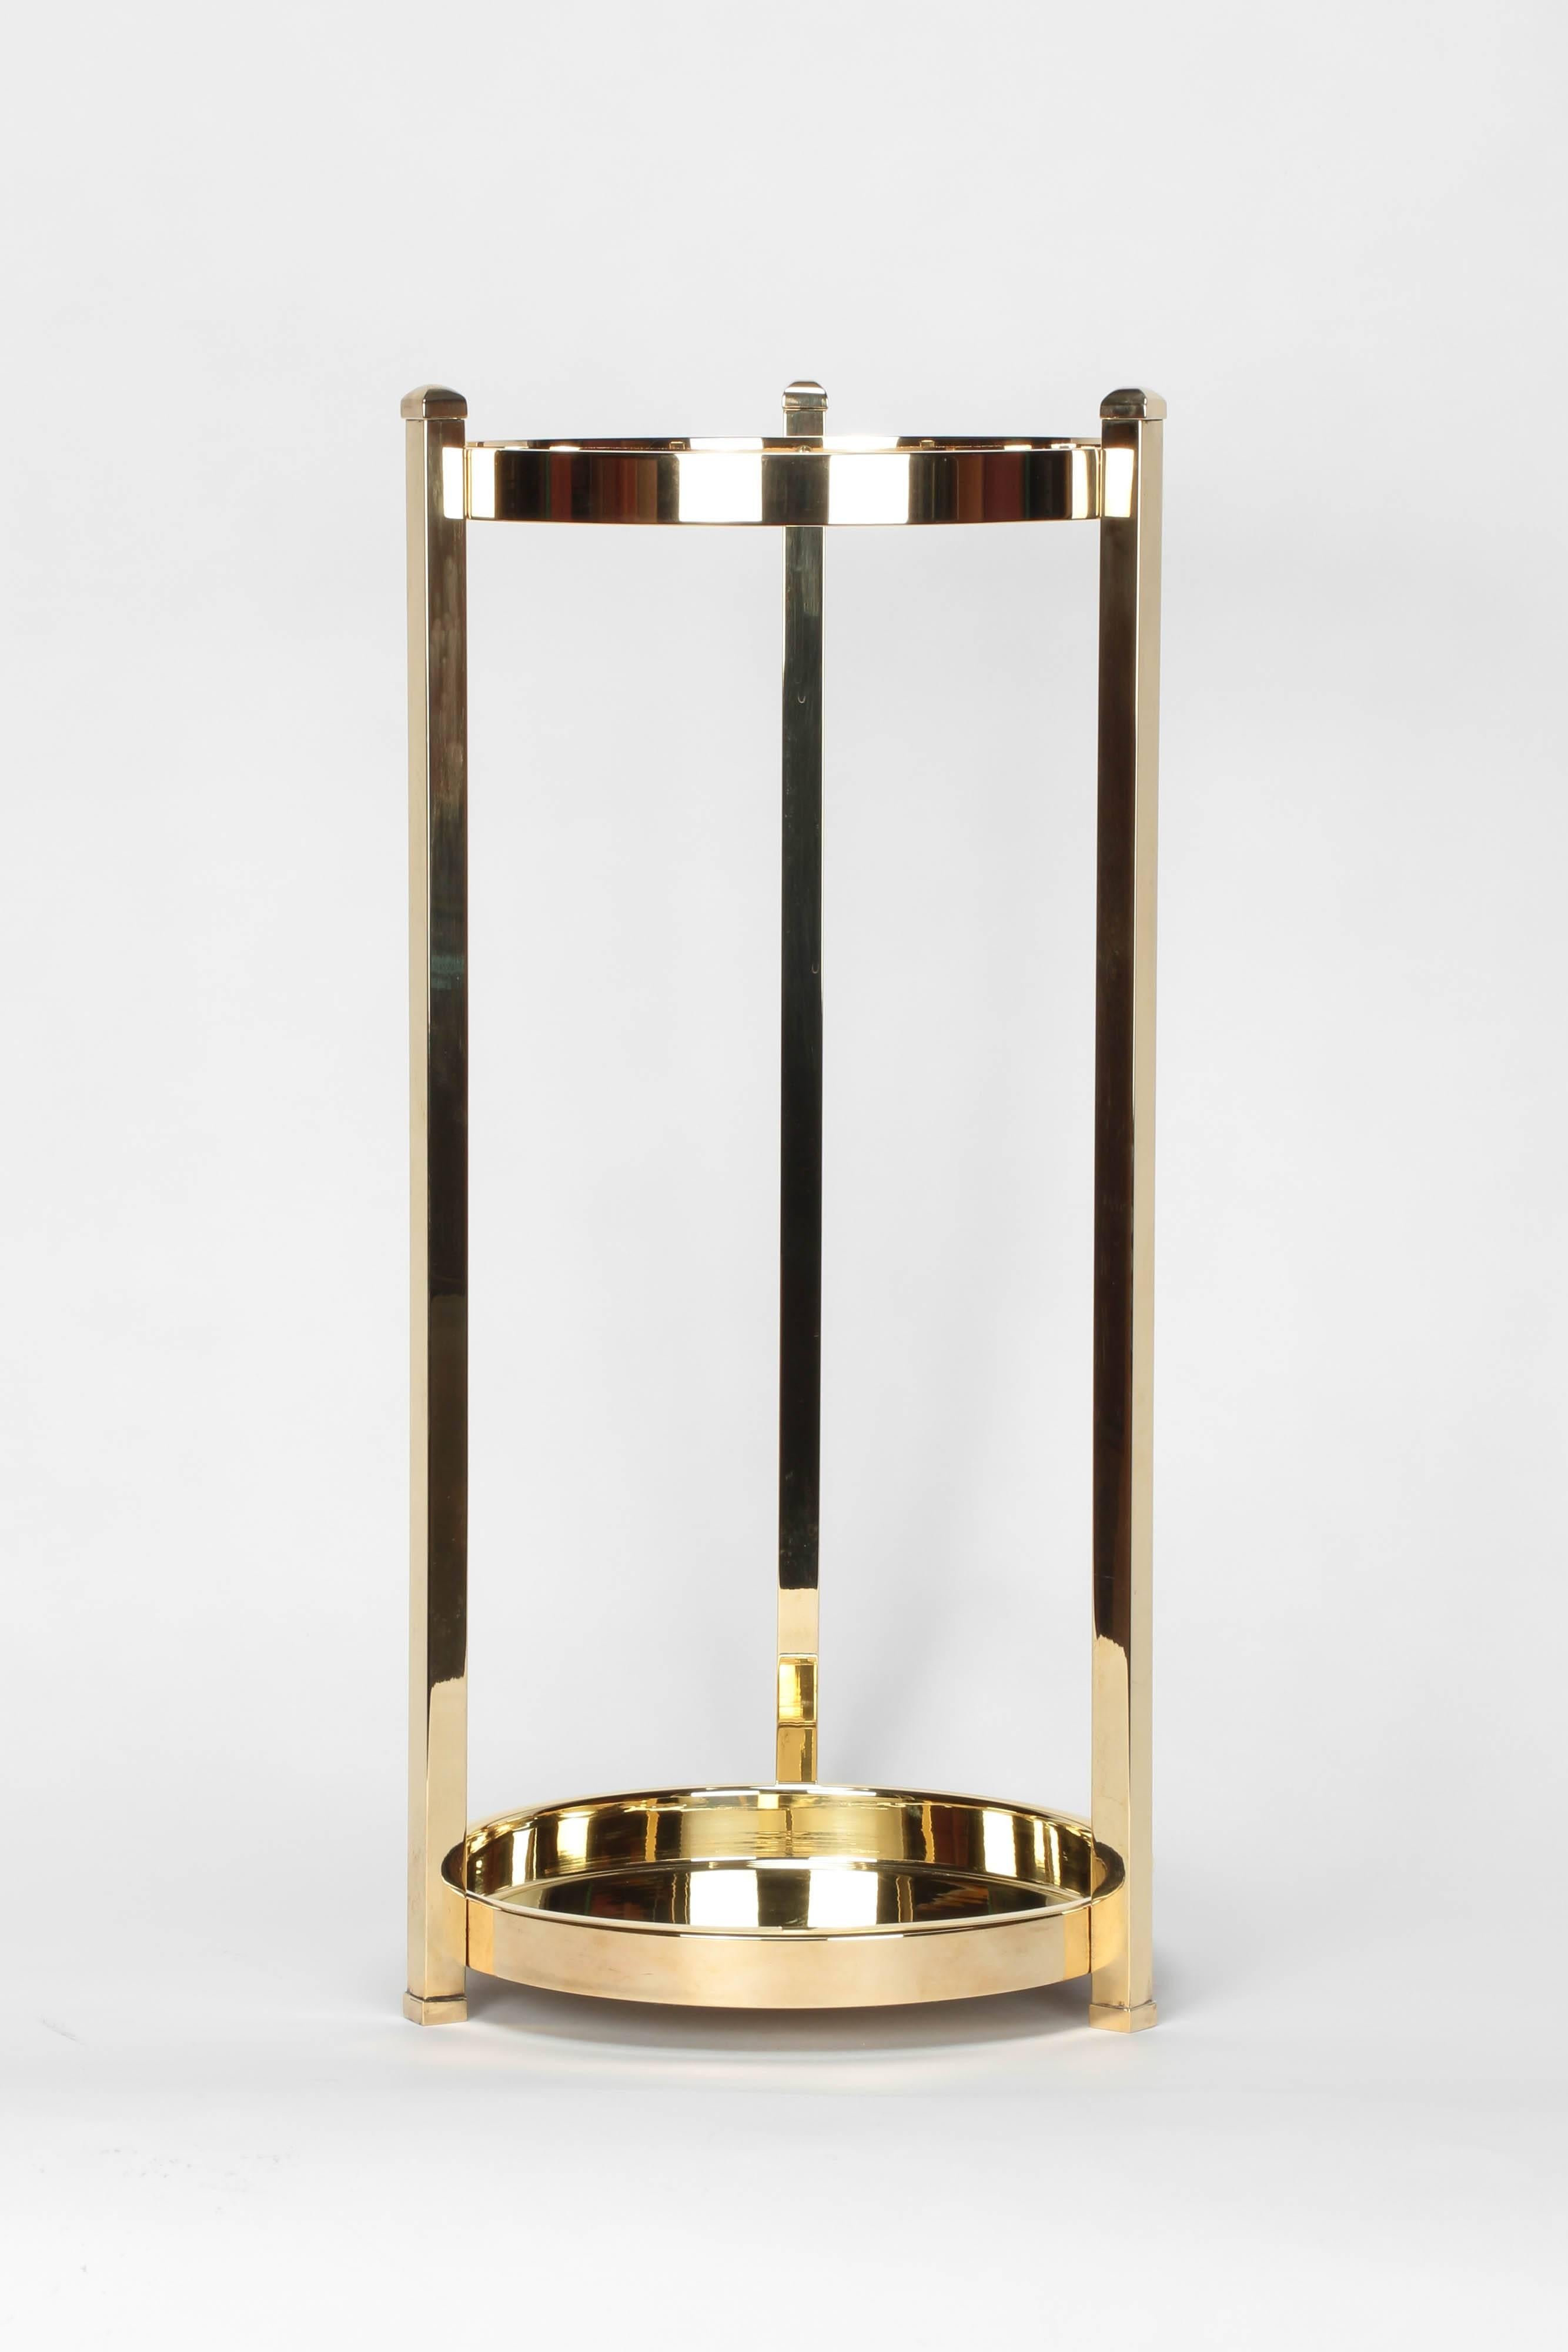 A wonderful solid brass umbrella stand, manufactured in the 1970s. High-quality Italian design, new polished brass.